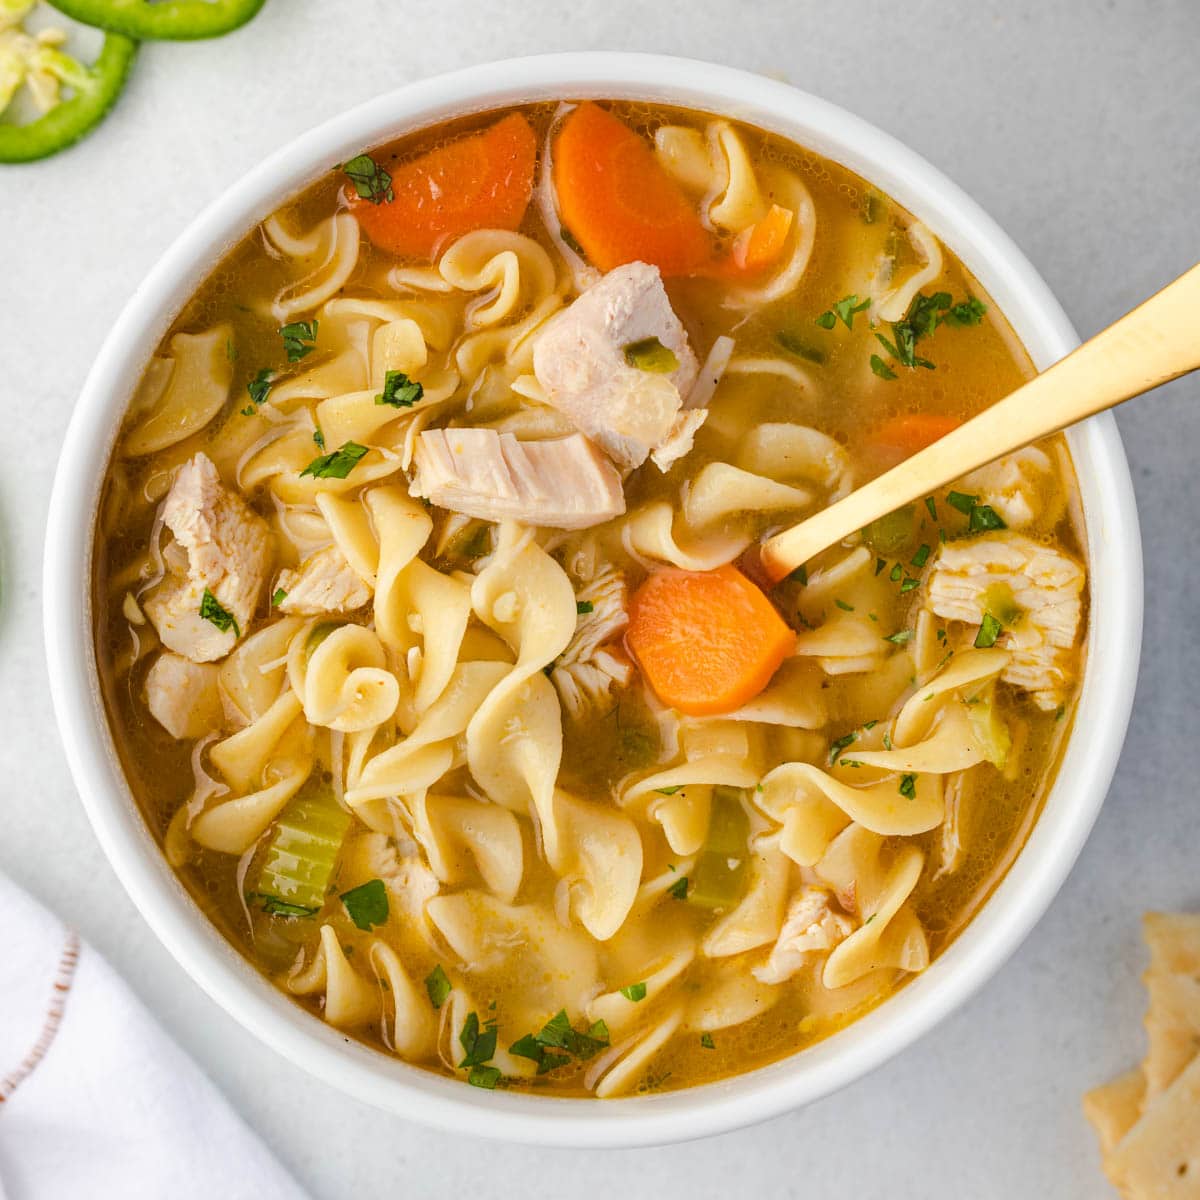 Spice up your life with Trader Joe's Steamed Chicken Soup